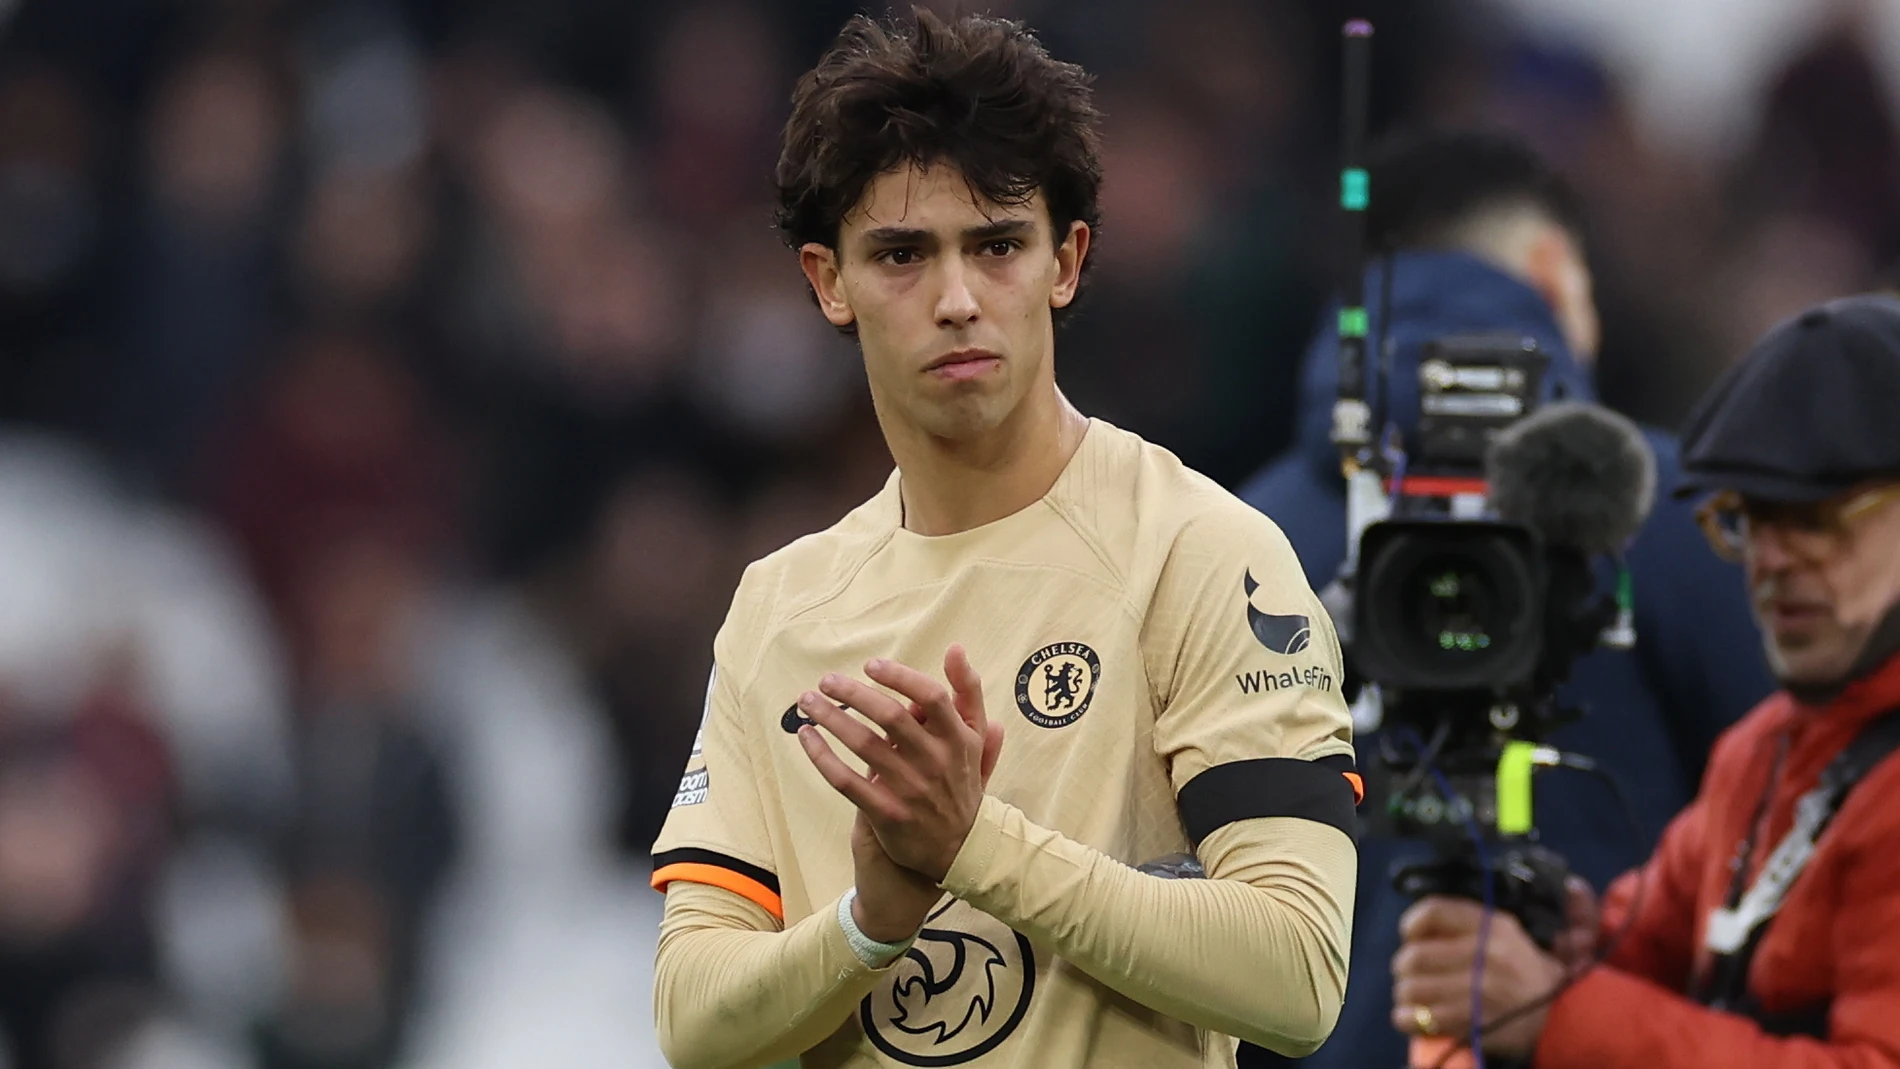 London (United Kingdom), 11/02/2023.- Joao Felix of Chelsea reacts after the English Premier League soccer match between West Ham United and Chelsea FC in London, Britain, 11 February 2023. (Reino Unido, Londres) EFE/EPA/Isabel Infantes EDITORIAL USE ONLY. No use with unauthorized audio, video, data, fixture lists, club/league logos or 'live' services. Online in-match use limited to 120 images, no video emulation. No use in betting, games or single club/league/player publications